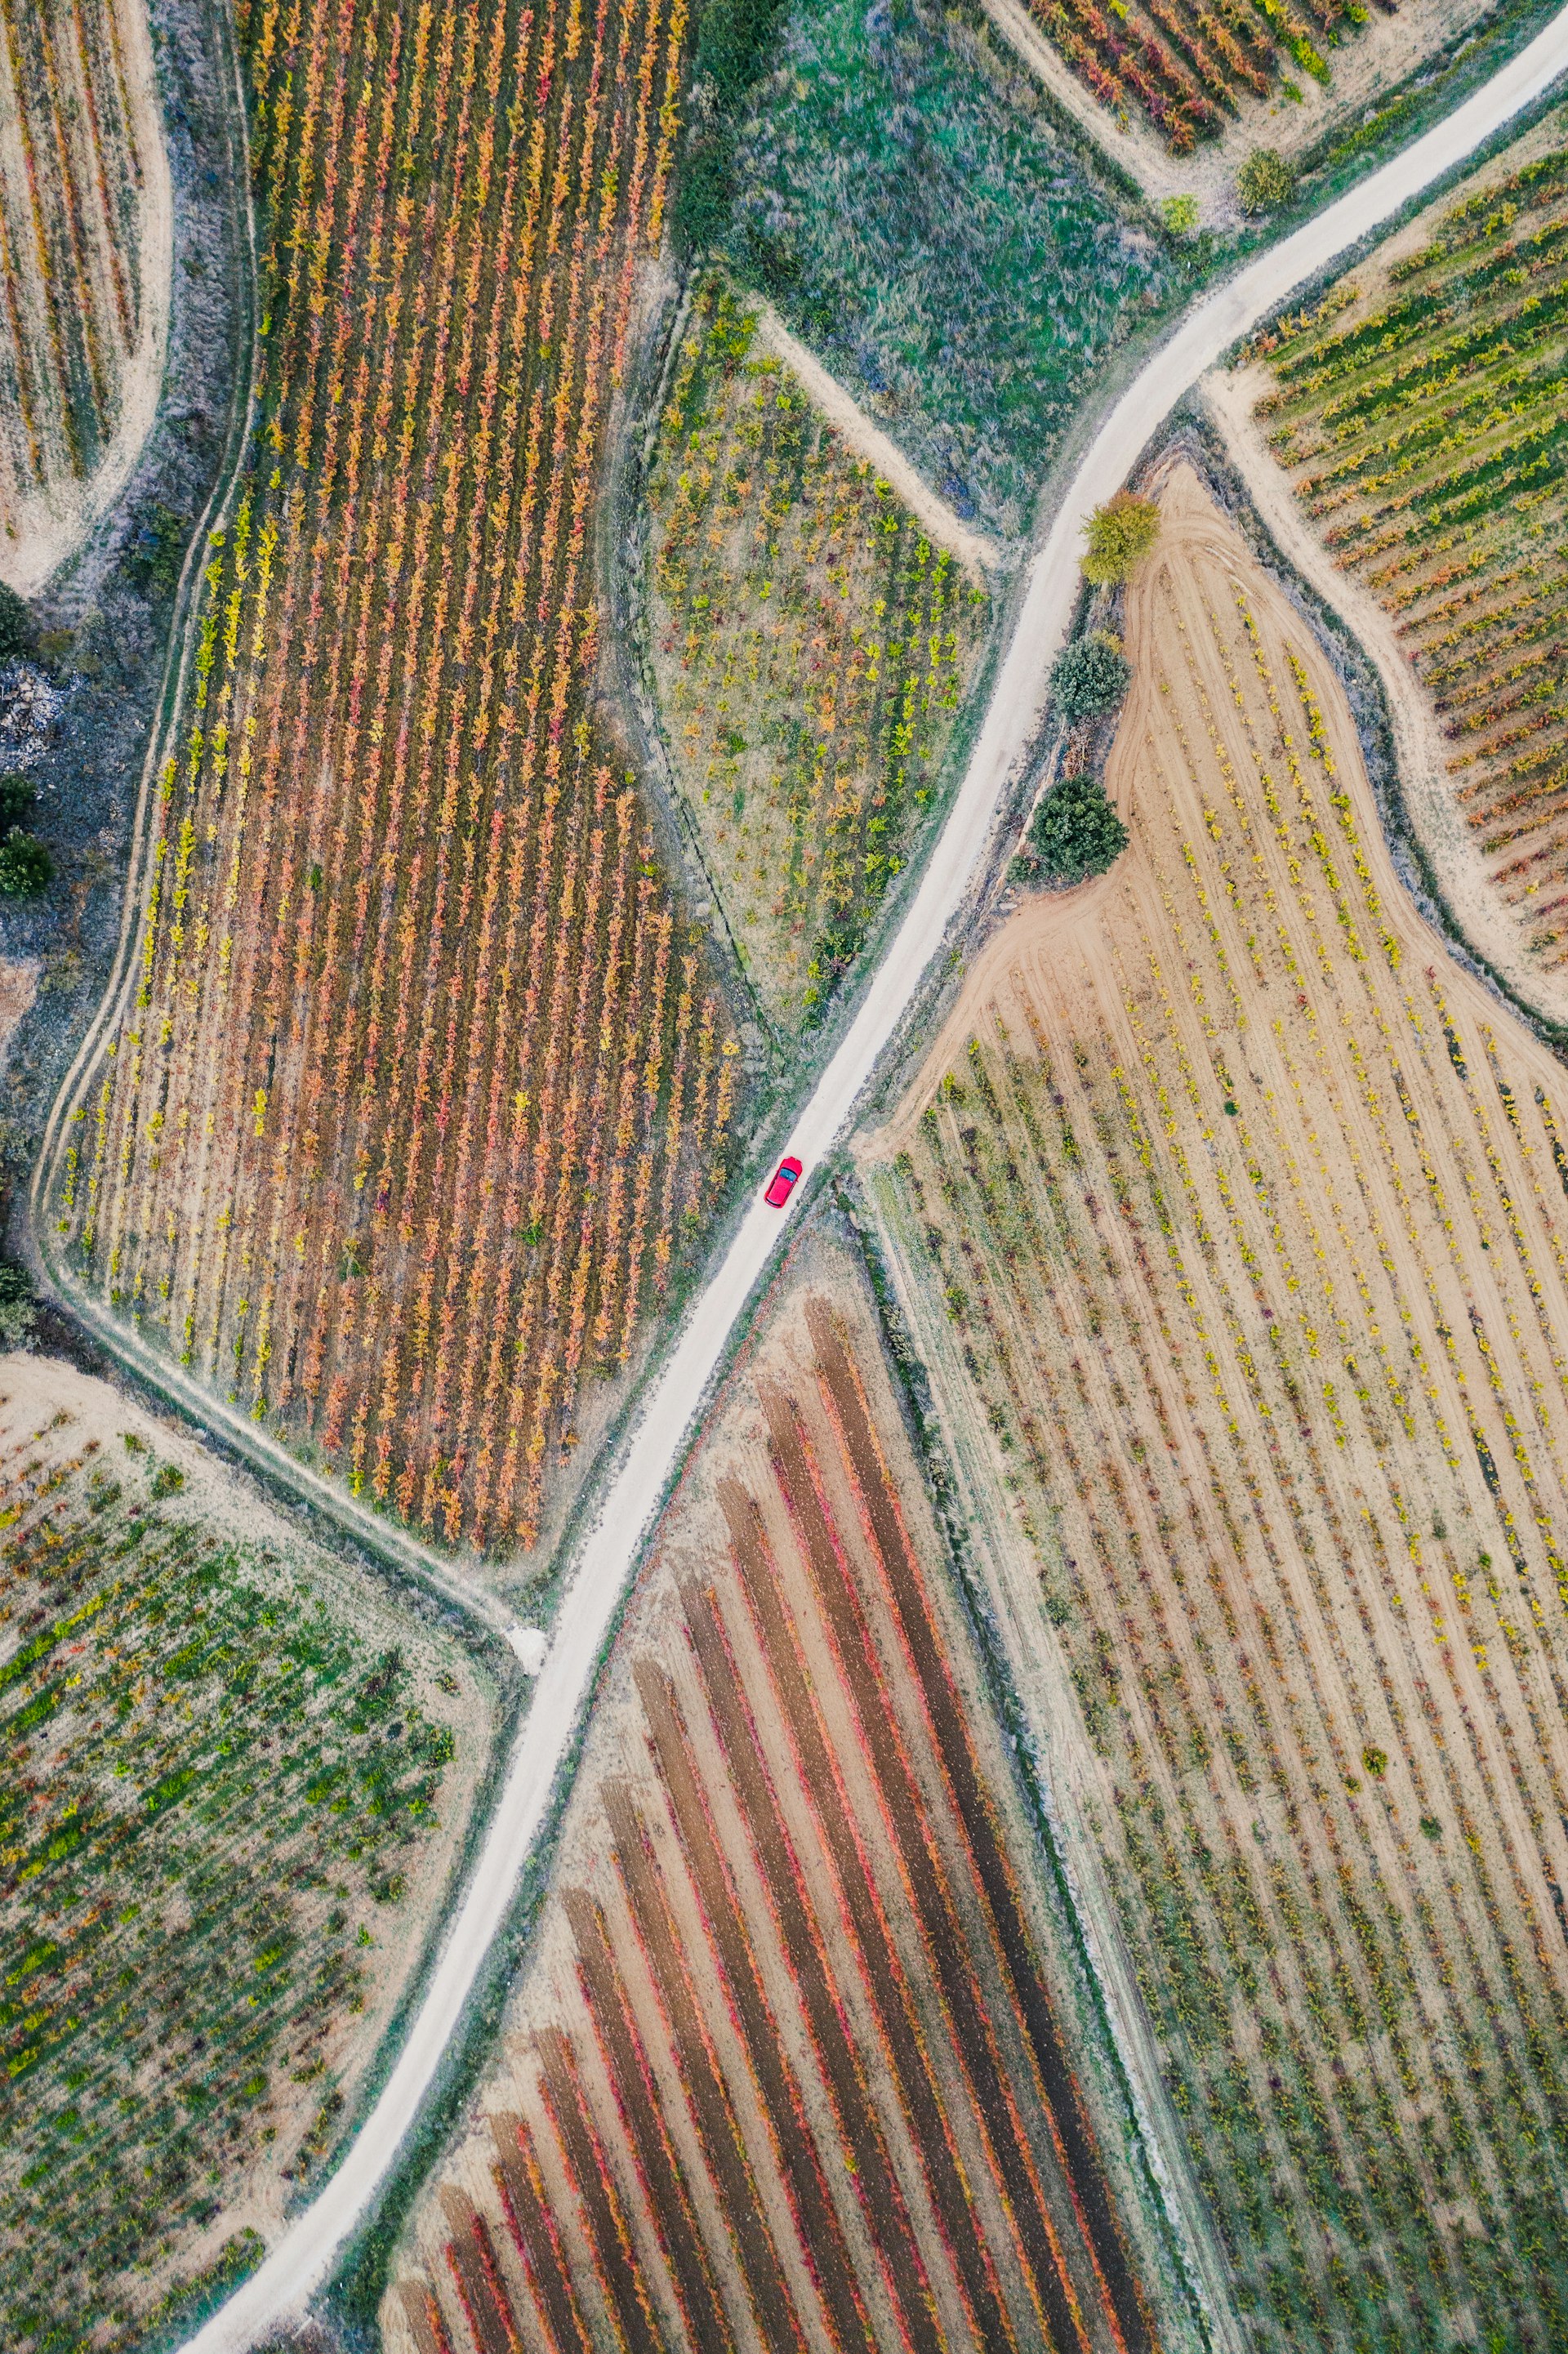 Aerial shot of a red car on a country road surrounded by vineyards in Spain